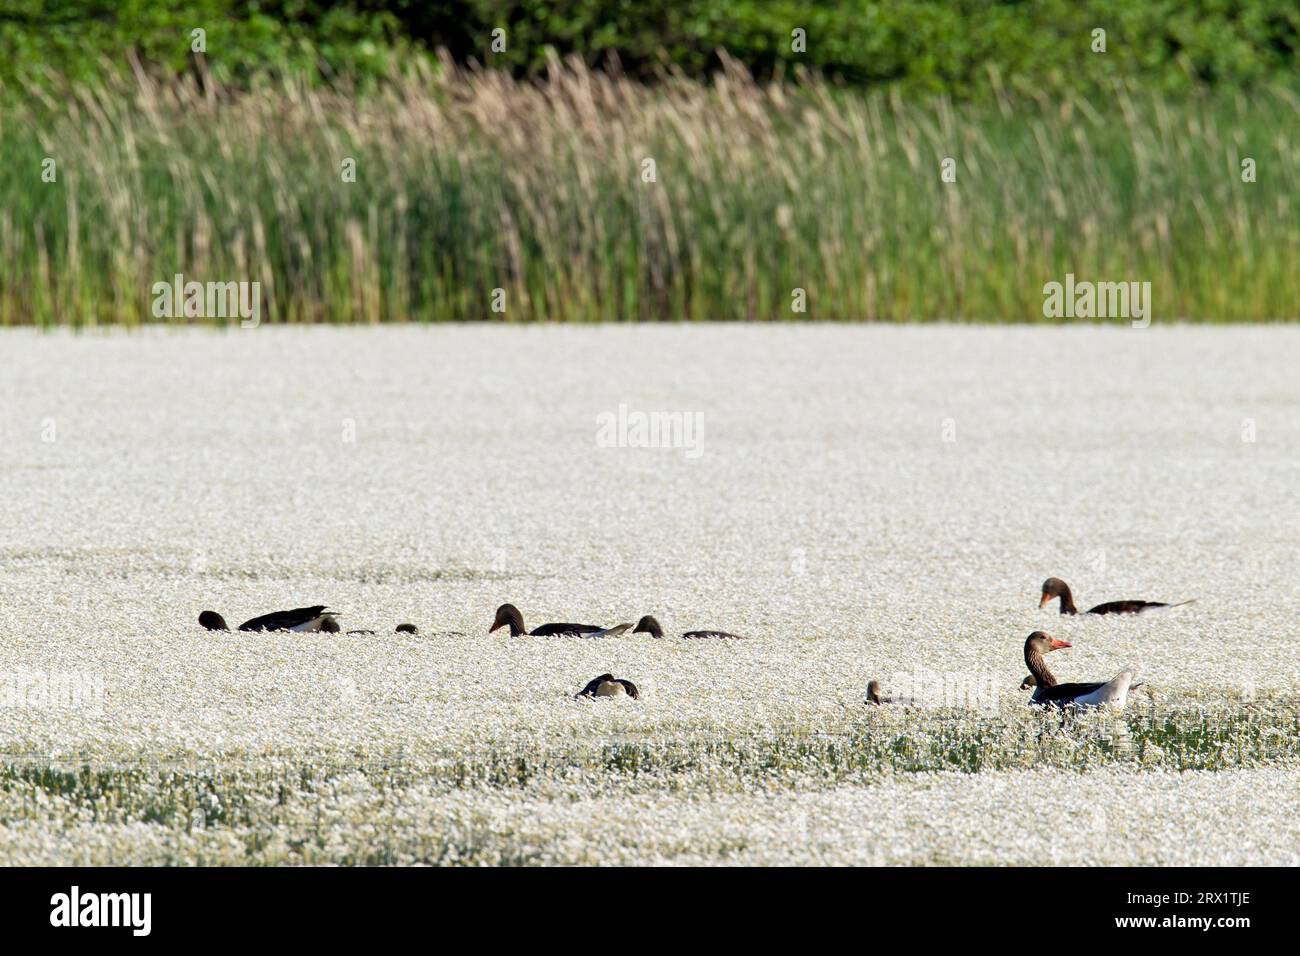 Greylag Goose, the young stay with their parents as a family group for some months (Photo) (Greylag Geese (Anser anser) with young between Pond Stock Photo